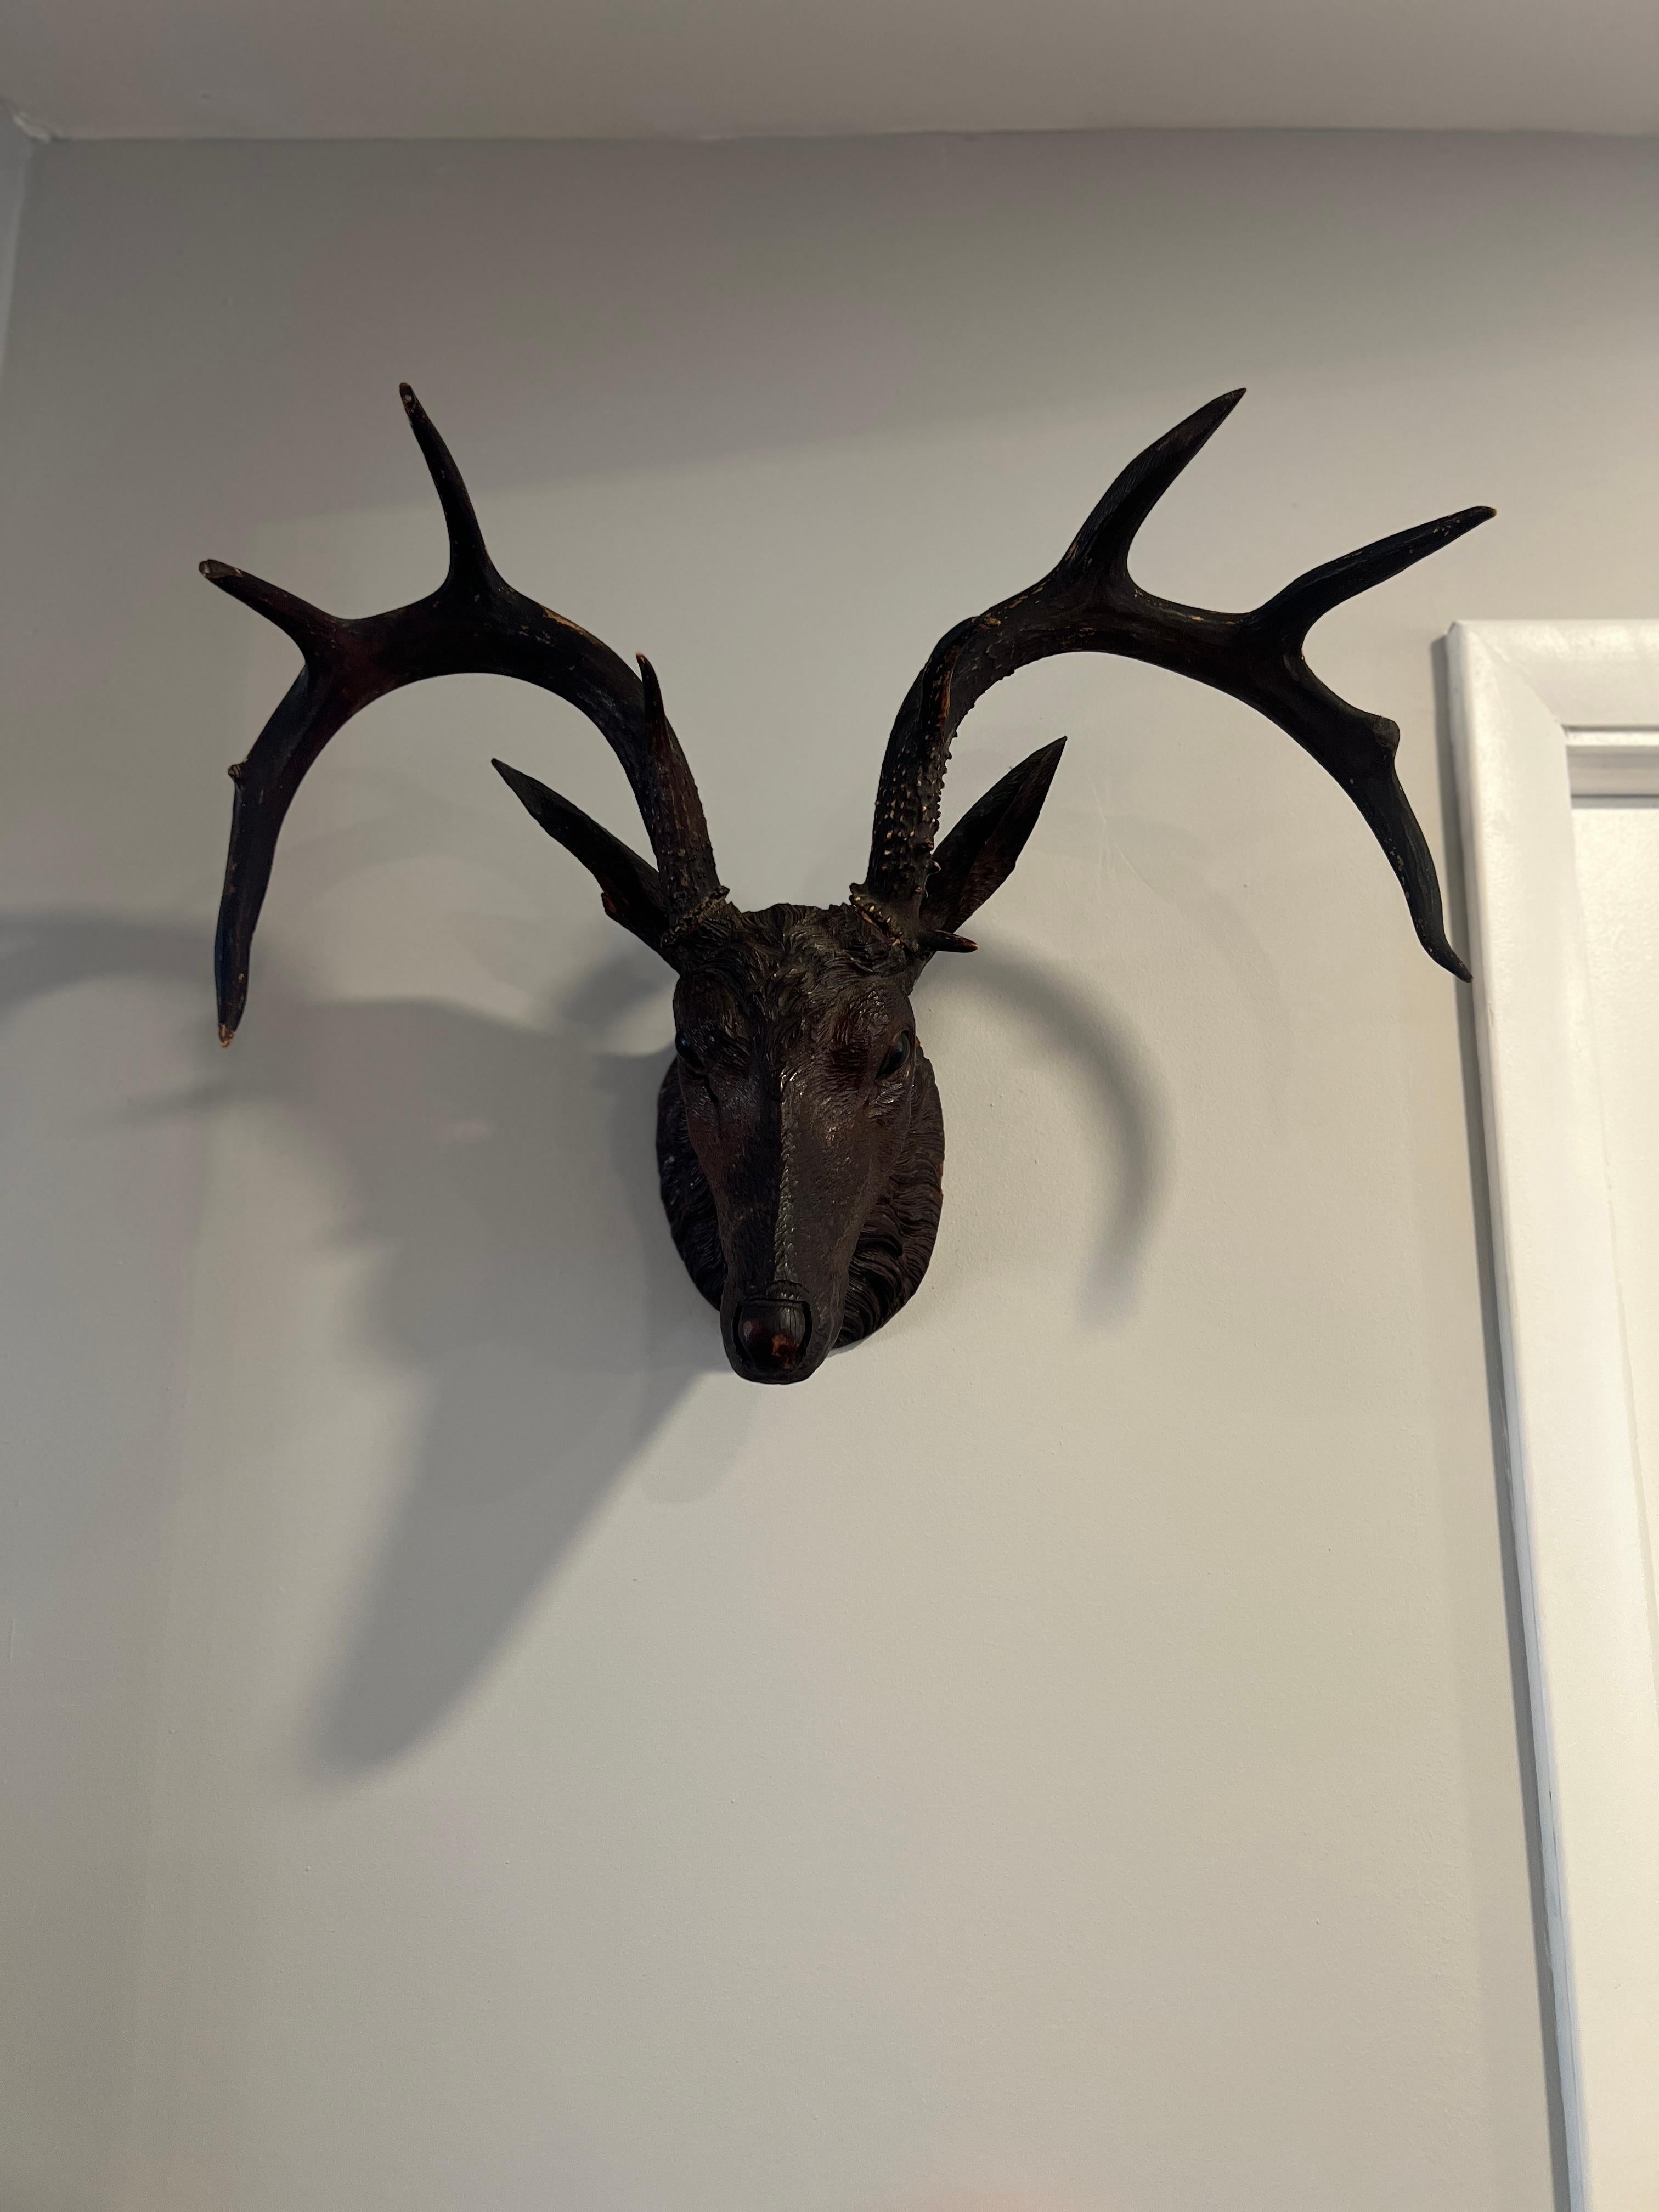 German, 19th century.

A large scale and finely carved Black Forest deer or stag head. 
The deer head made of carved wood and original glass eyes and artist inset original antlers. These head mounts have become highly coveted and valuable. 

This